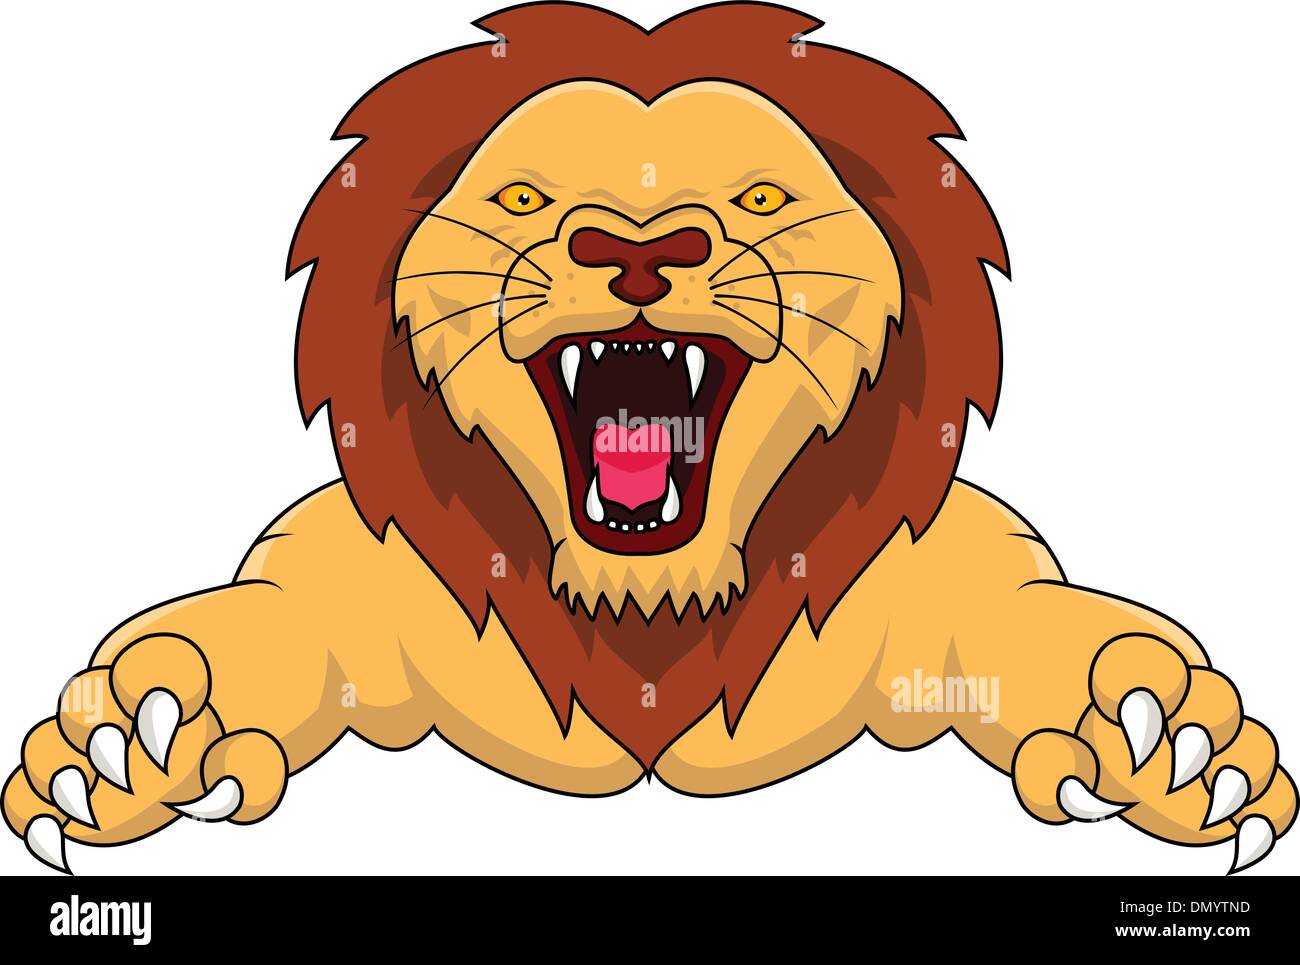 Angry lion illustration Stock Vector